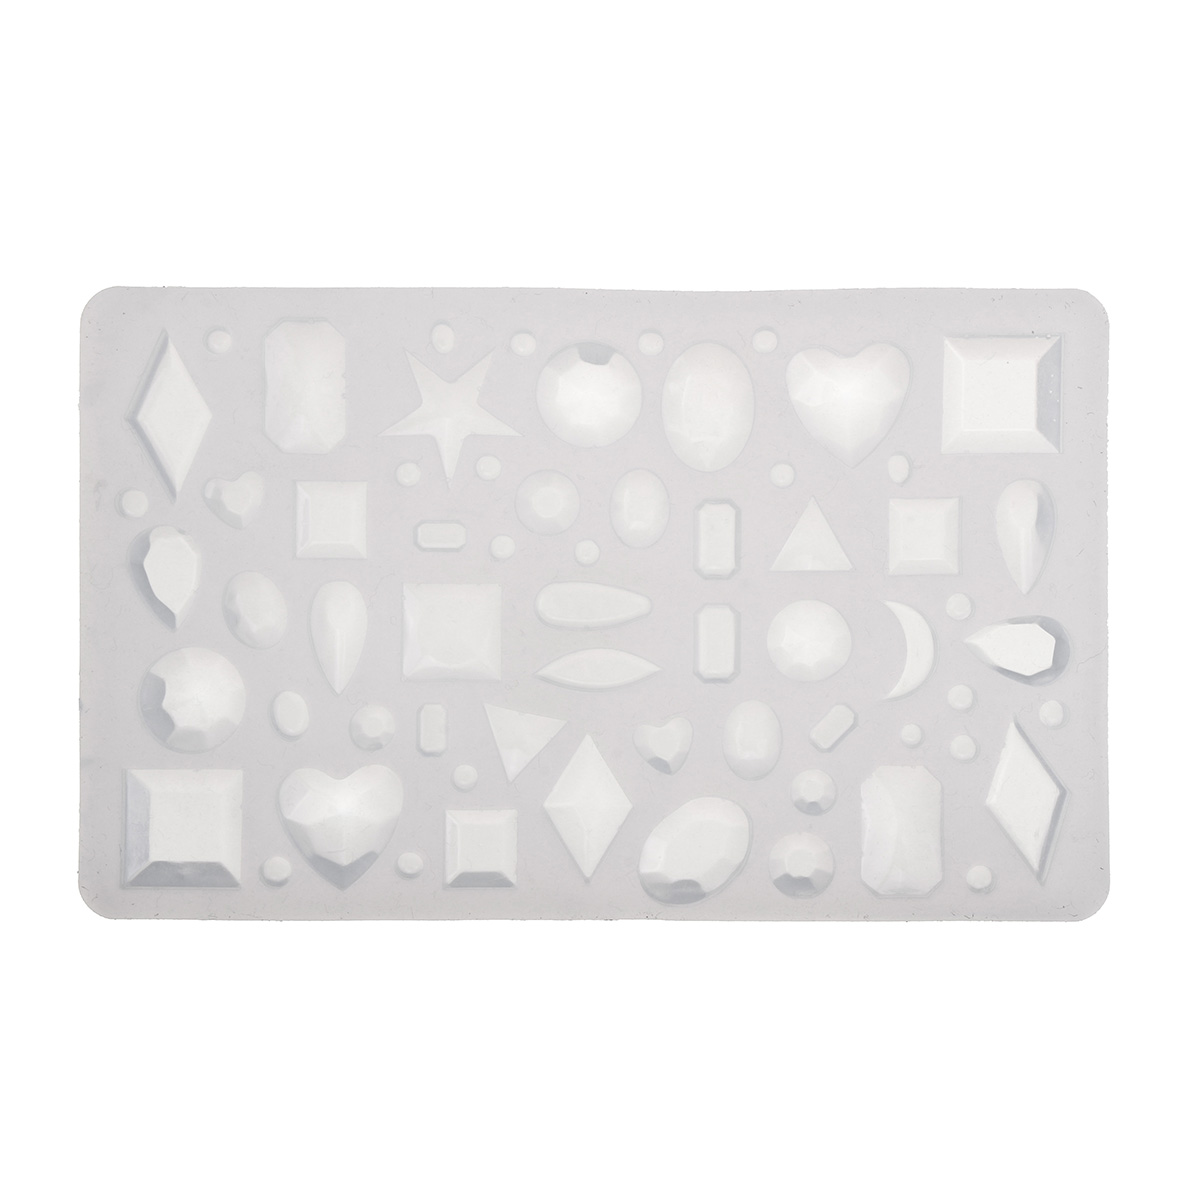 98Pcs-DIY-Silicone-Pendant-Mold-Jewelry-Making-Cube-Resin-Casting-Molds-Craft-Tools-Kit-1517942